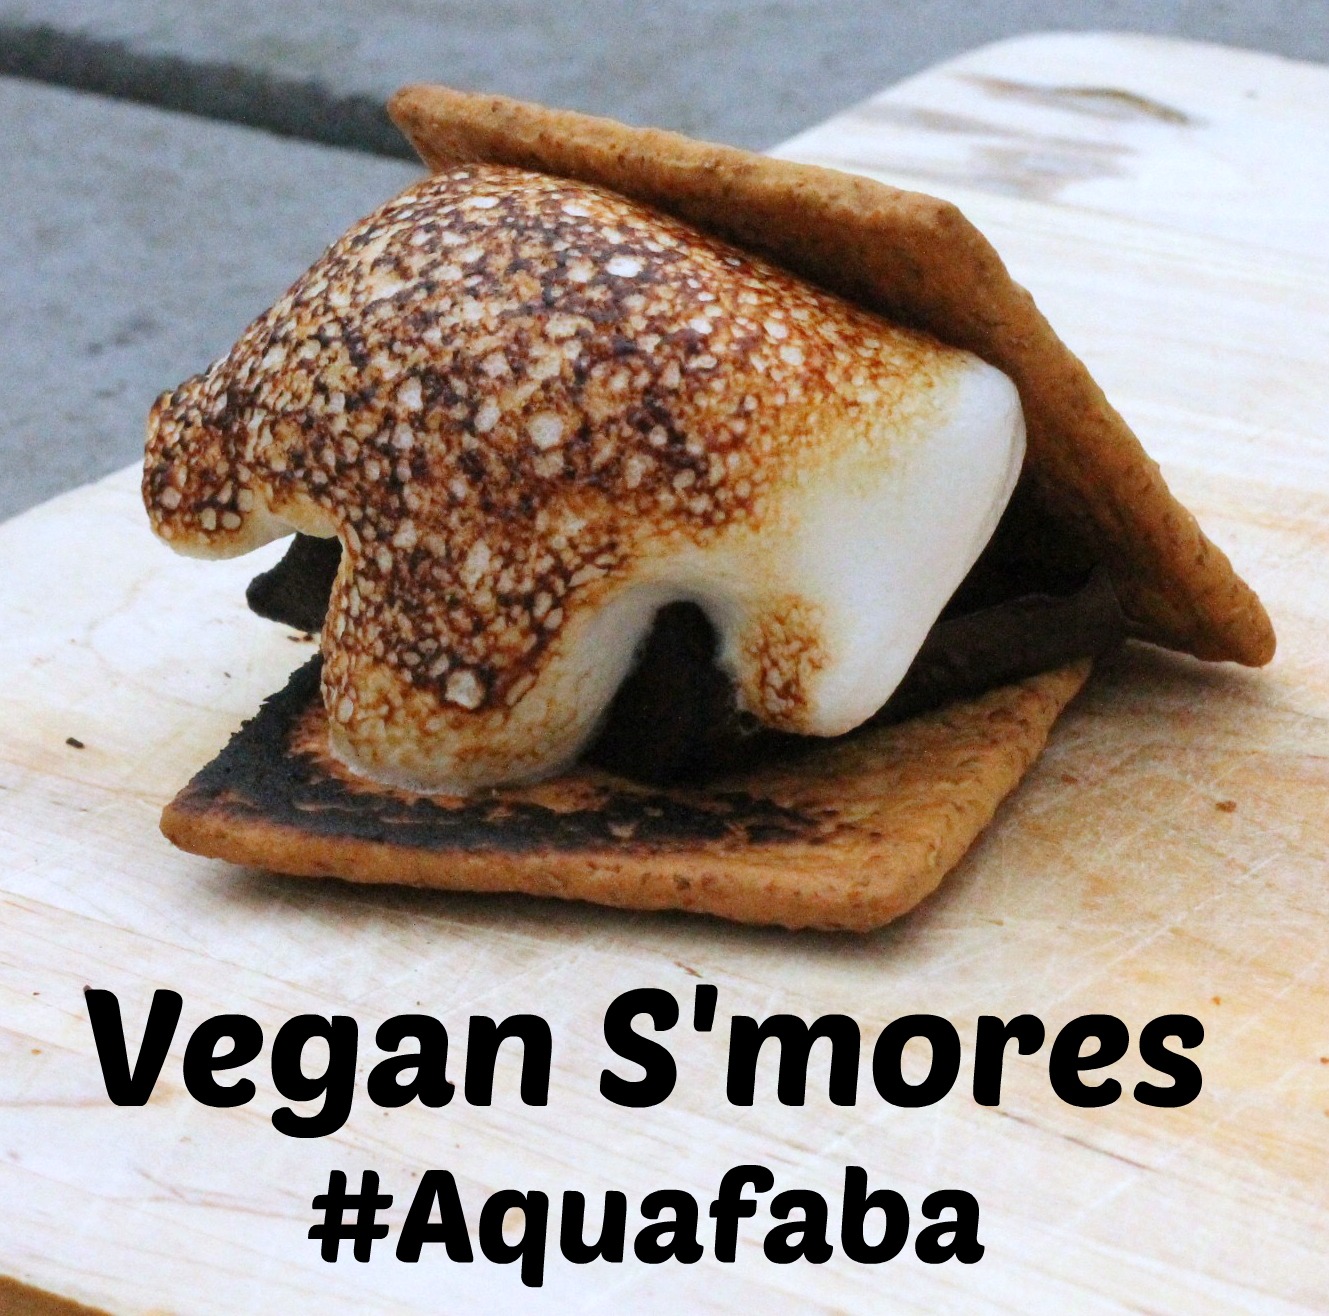 vegan s'mores made with aquafaba marshmallow fluff